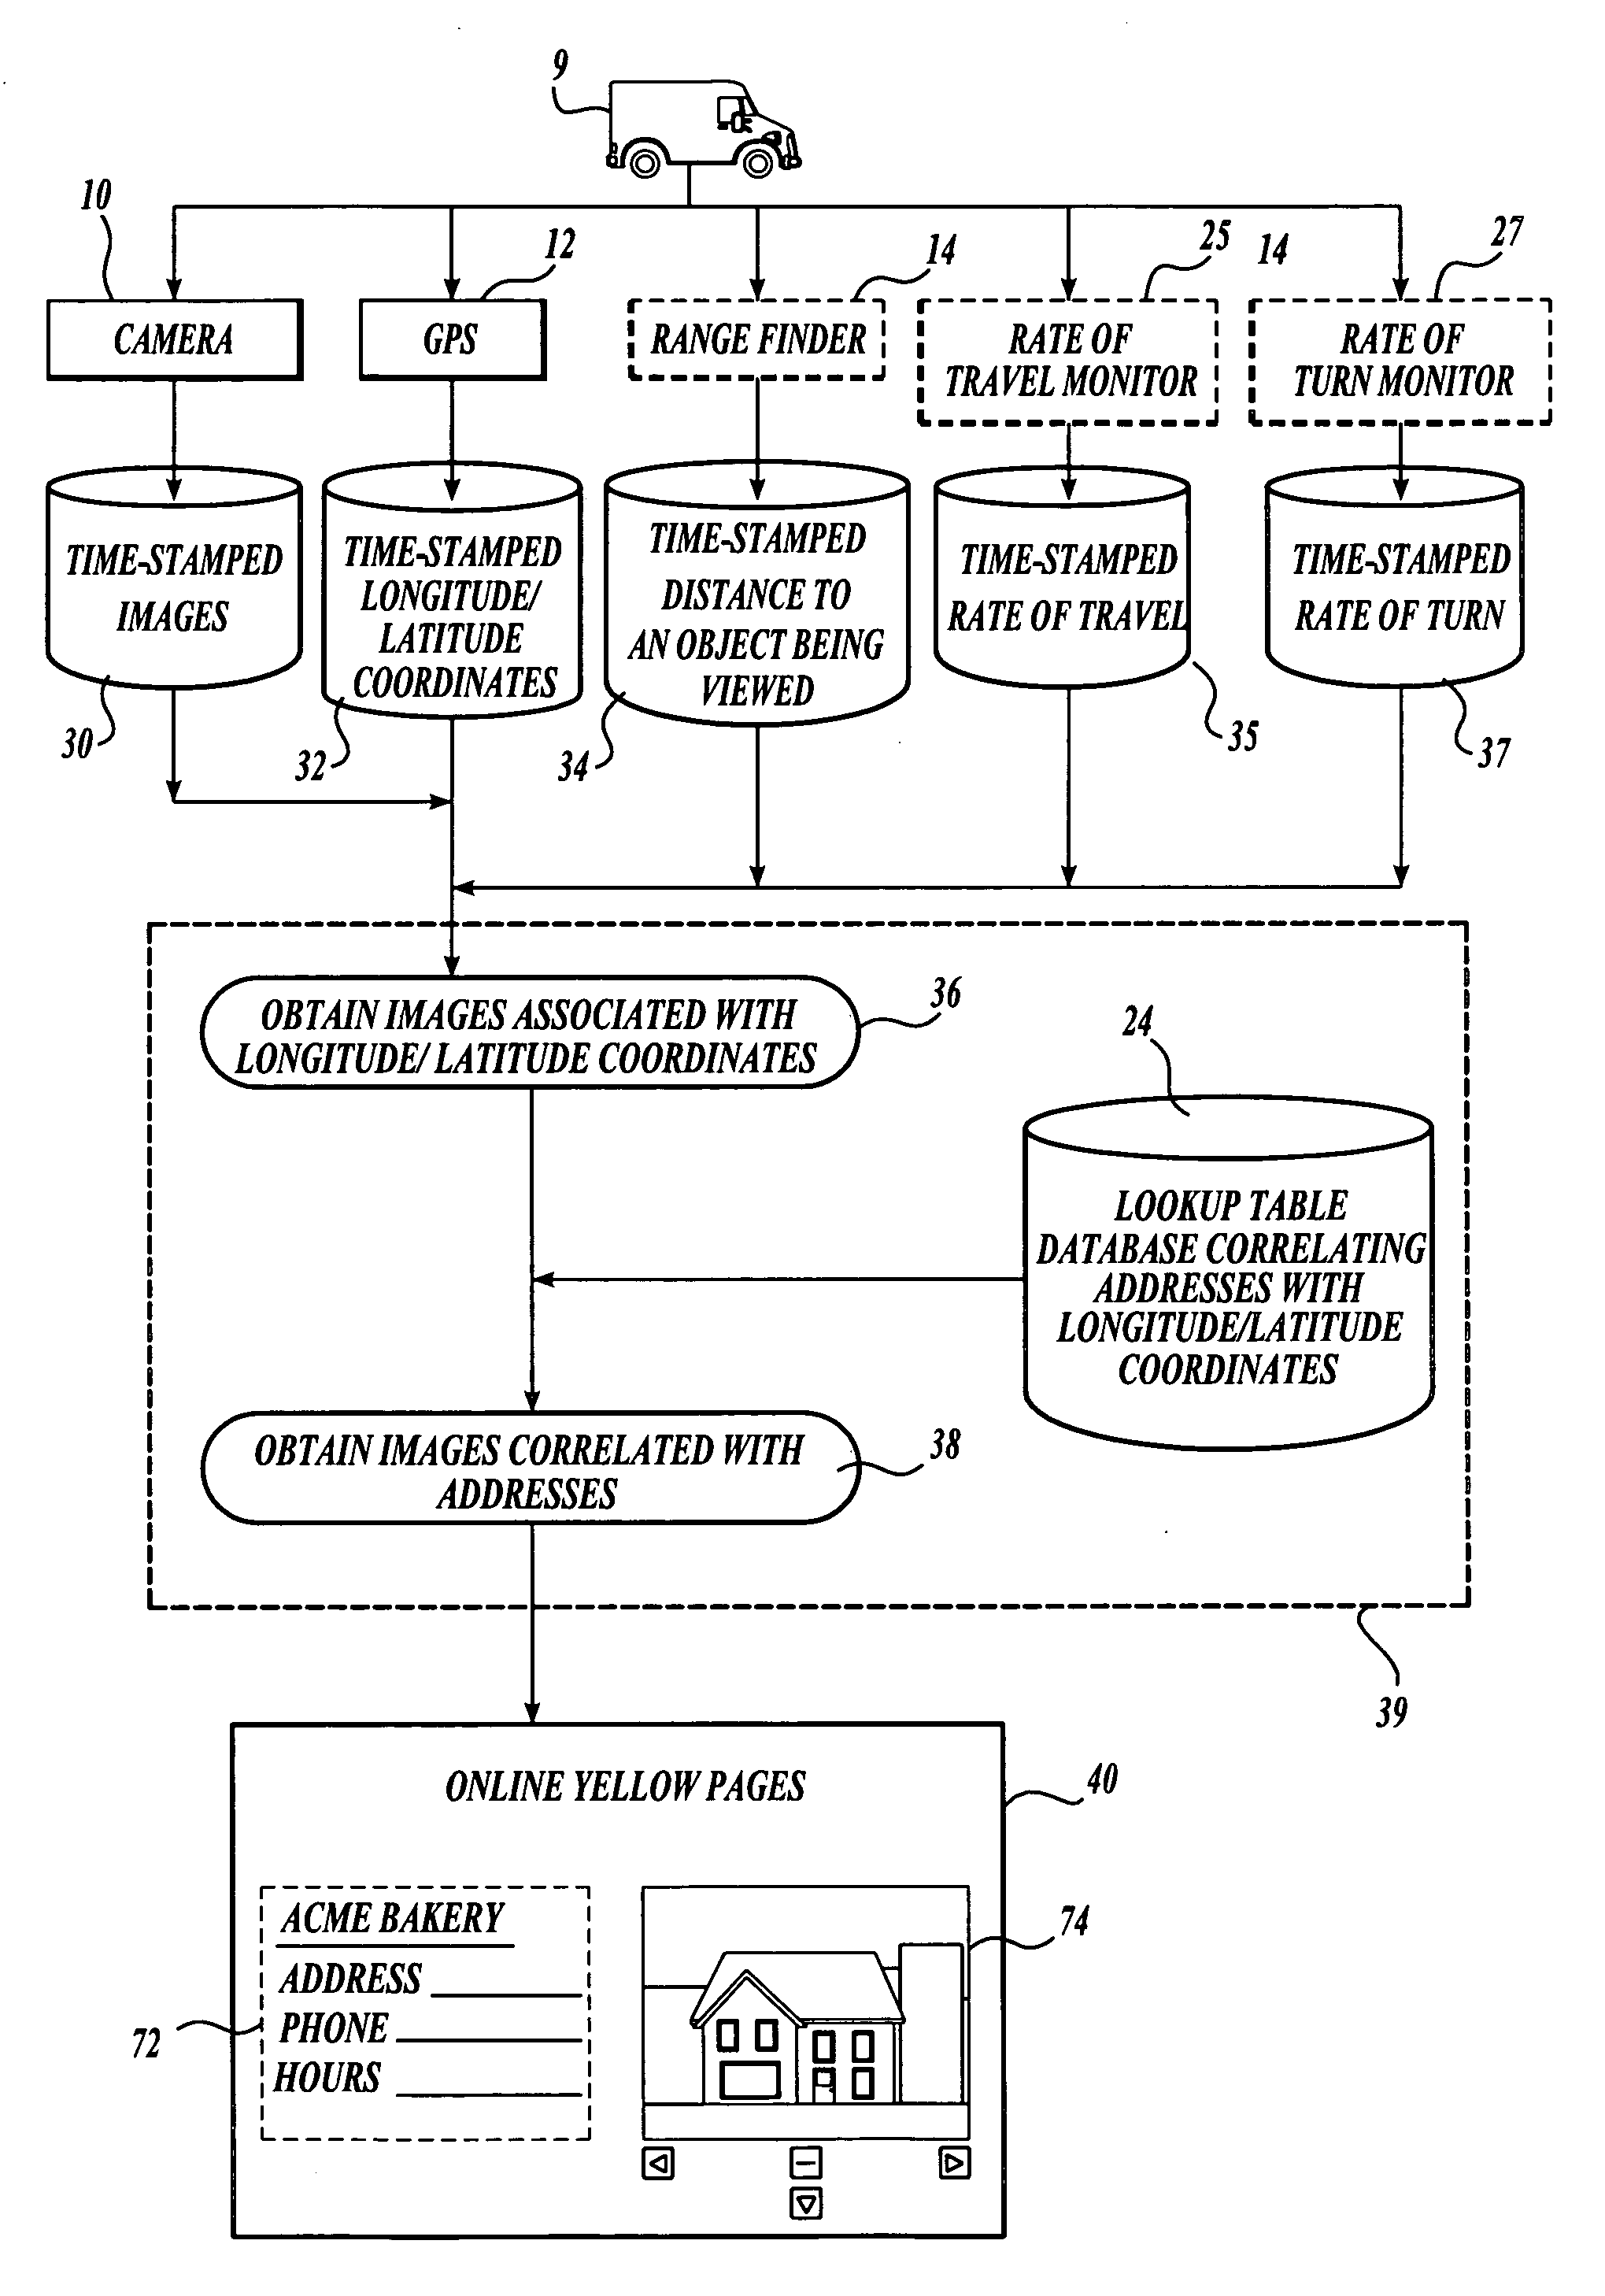 Displaying images in a network or visual mapping system